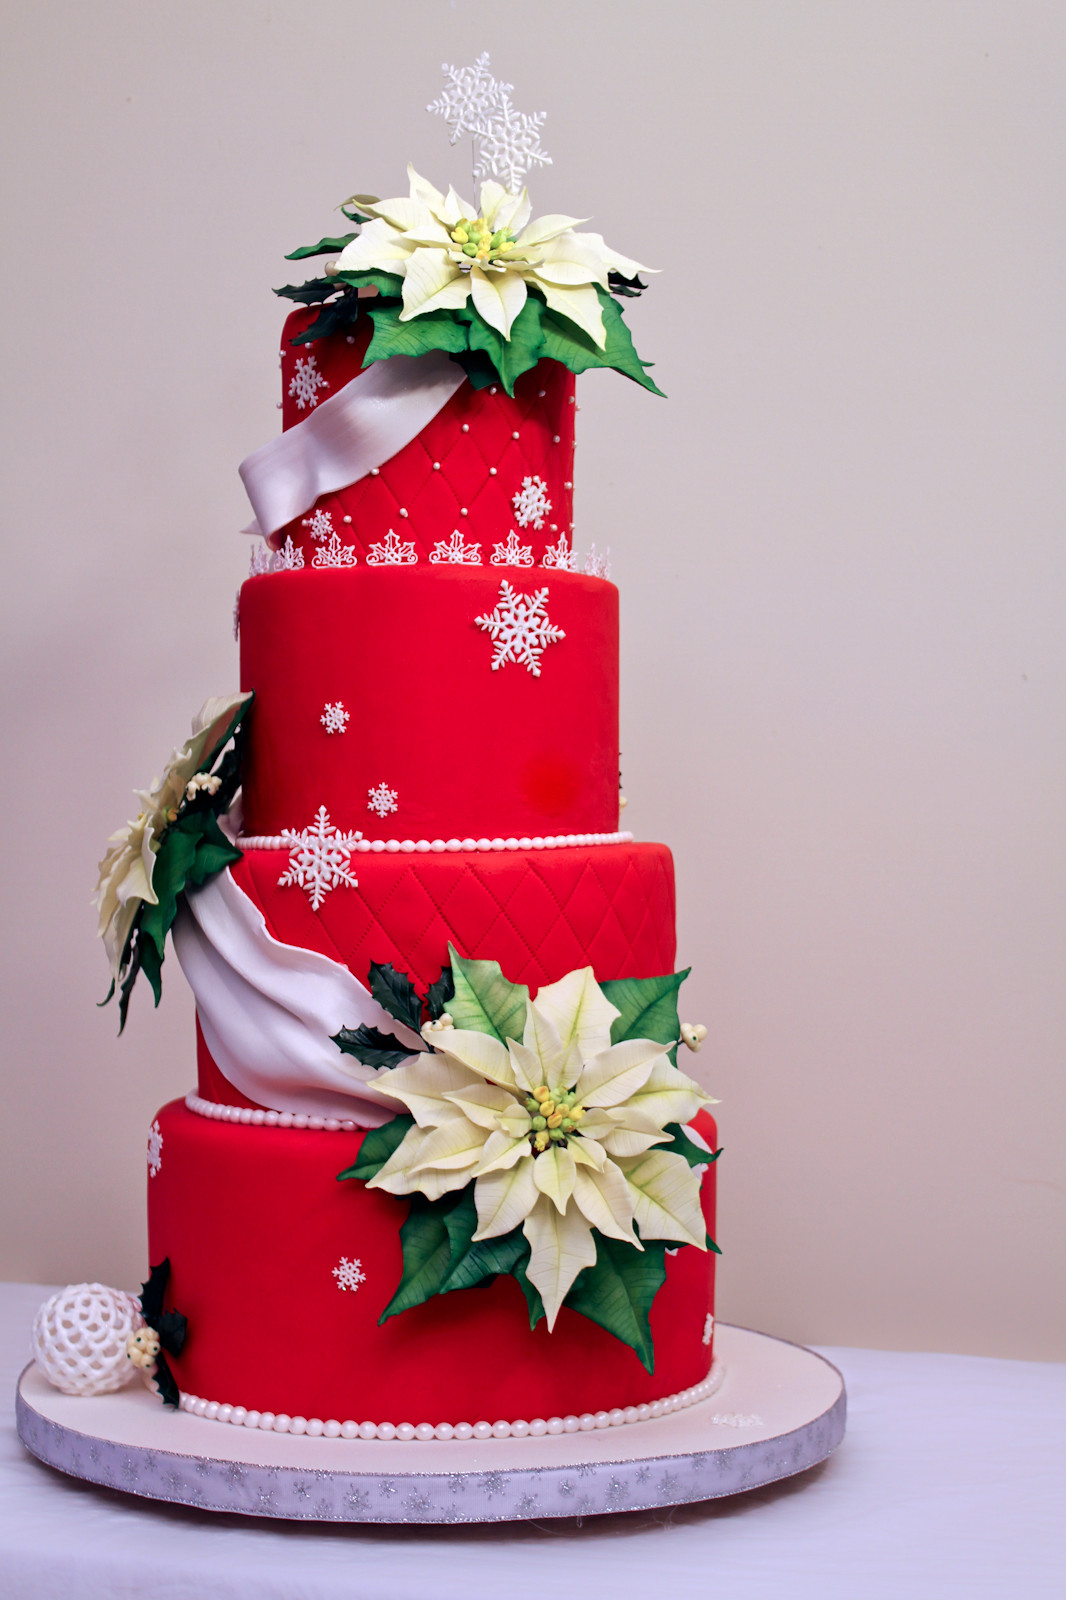 Christmas Cakes Images
 The Cake Engineer Holiday Poinsettia Cake